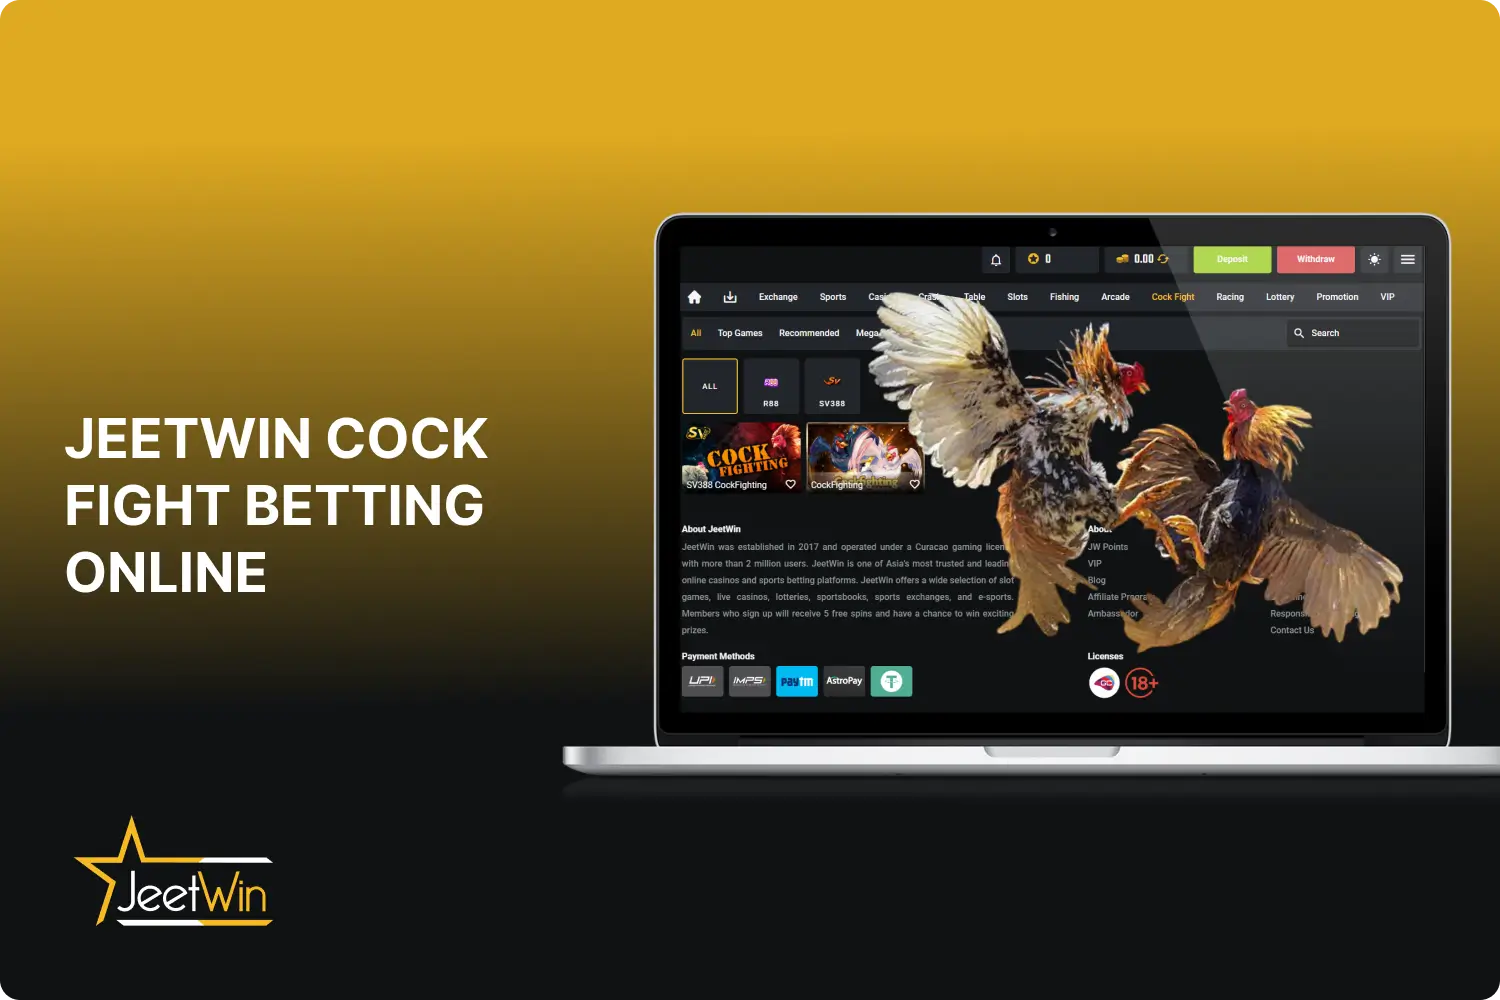 Jeetwin offers betting online on cock fights pre-match and live for betters in India